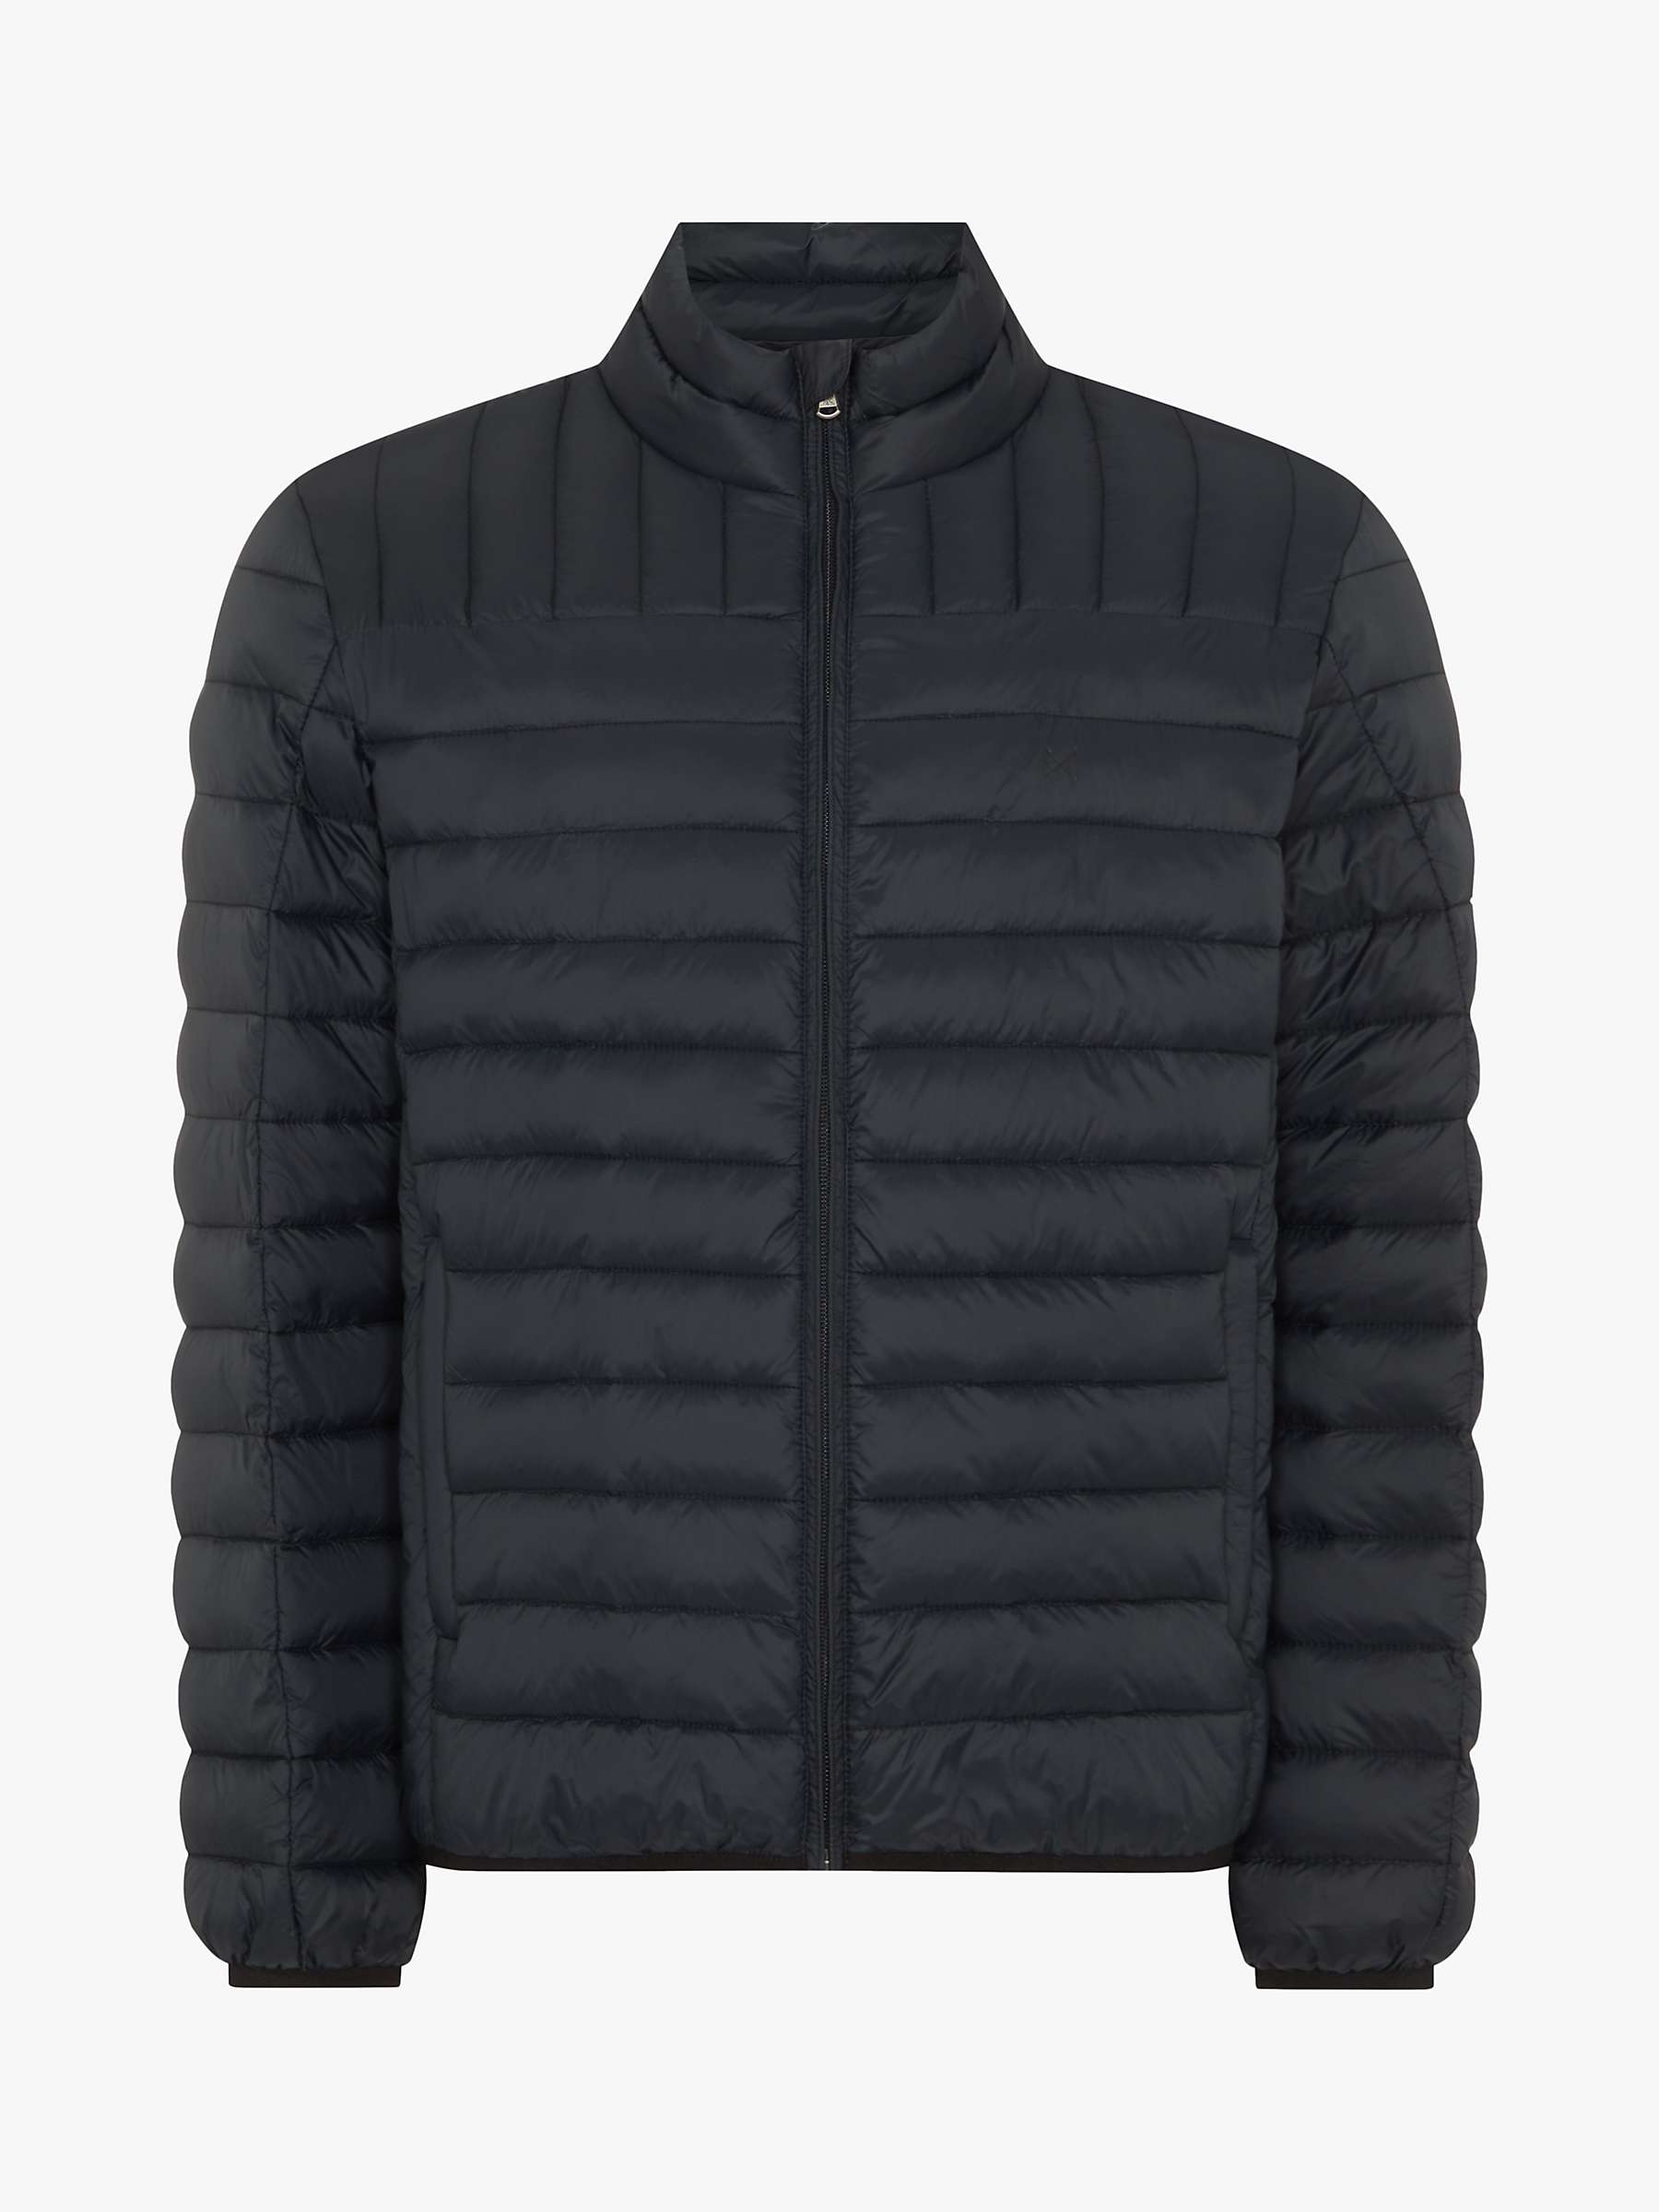 Crew Clothing Lowther Lightweight Jacket, Black at John Lewis & Partners